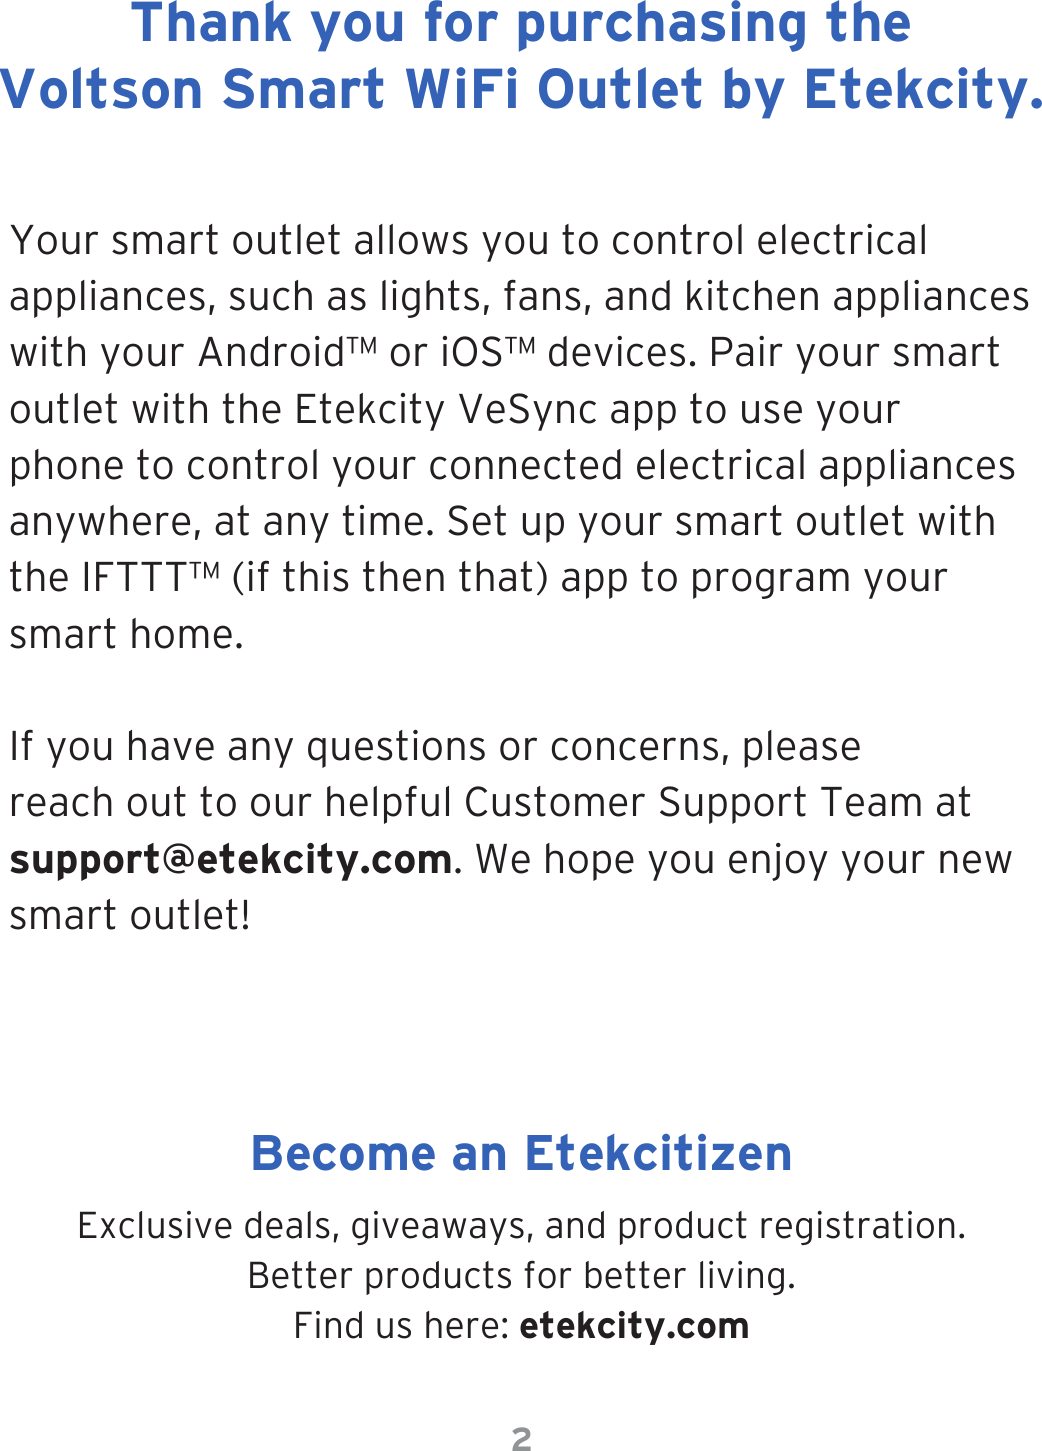 2Your smart outlet allows you to control electrical appliances, such as lights, fans, and kitchen appliances with your Android™ or iOS™ devices. Pair your smart outlet with the Etekcity VeSync app to use your phone to control your connected electrical appliances anywhere, at any time. Set up your smart outlet with the IFTTT™ (if this then that) app to program your smart home.If you have any questions or concerns, please reach out to our helpful Customer Support Team at support@etekcity.com. We hope you enjoy your new smart outlet!Exclusive deals, giveaways, and product registration.  Better products for better living.Find us here: etekcity.comThank you for purchasing the Voltson Smart WiFi Outlet by Etekcity.Become an Etekcitizen